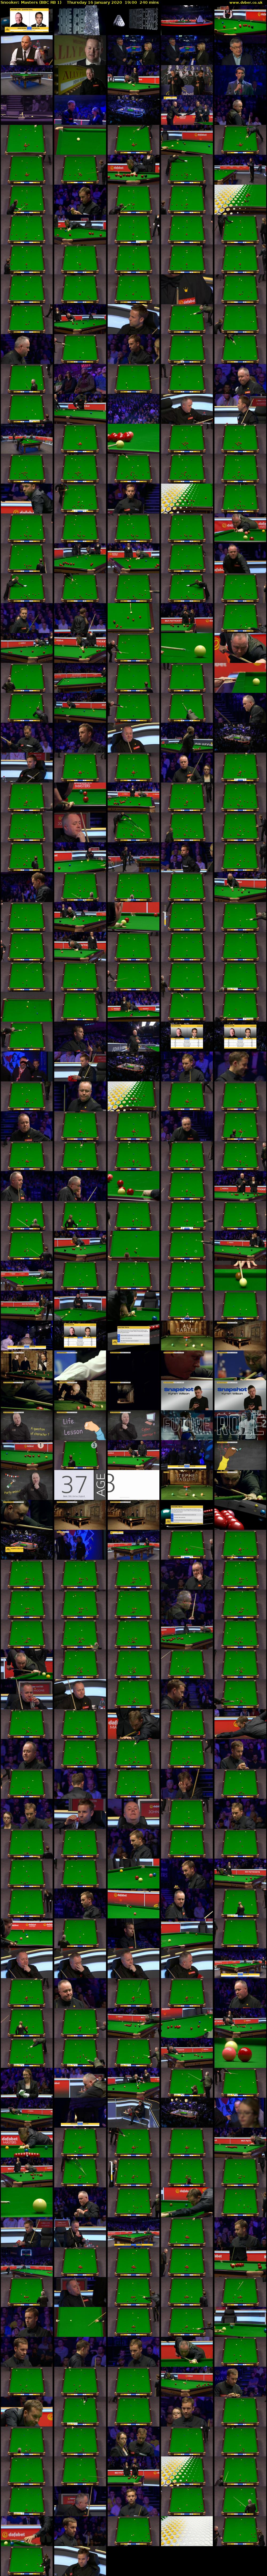 Snooker: Masters (BBC RB 1) Thursday 16 January 2020 19:00 - 23:00